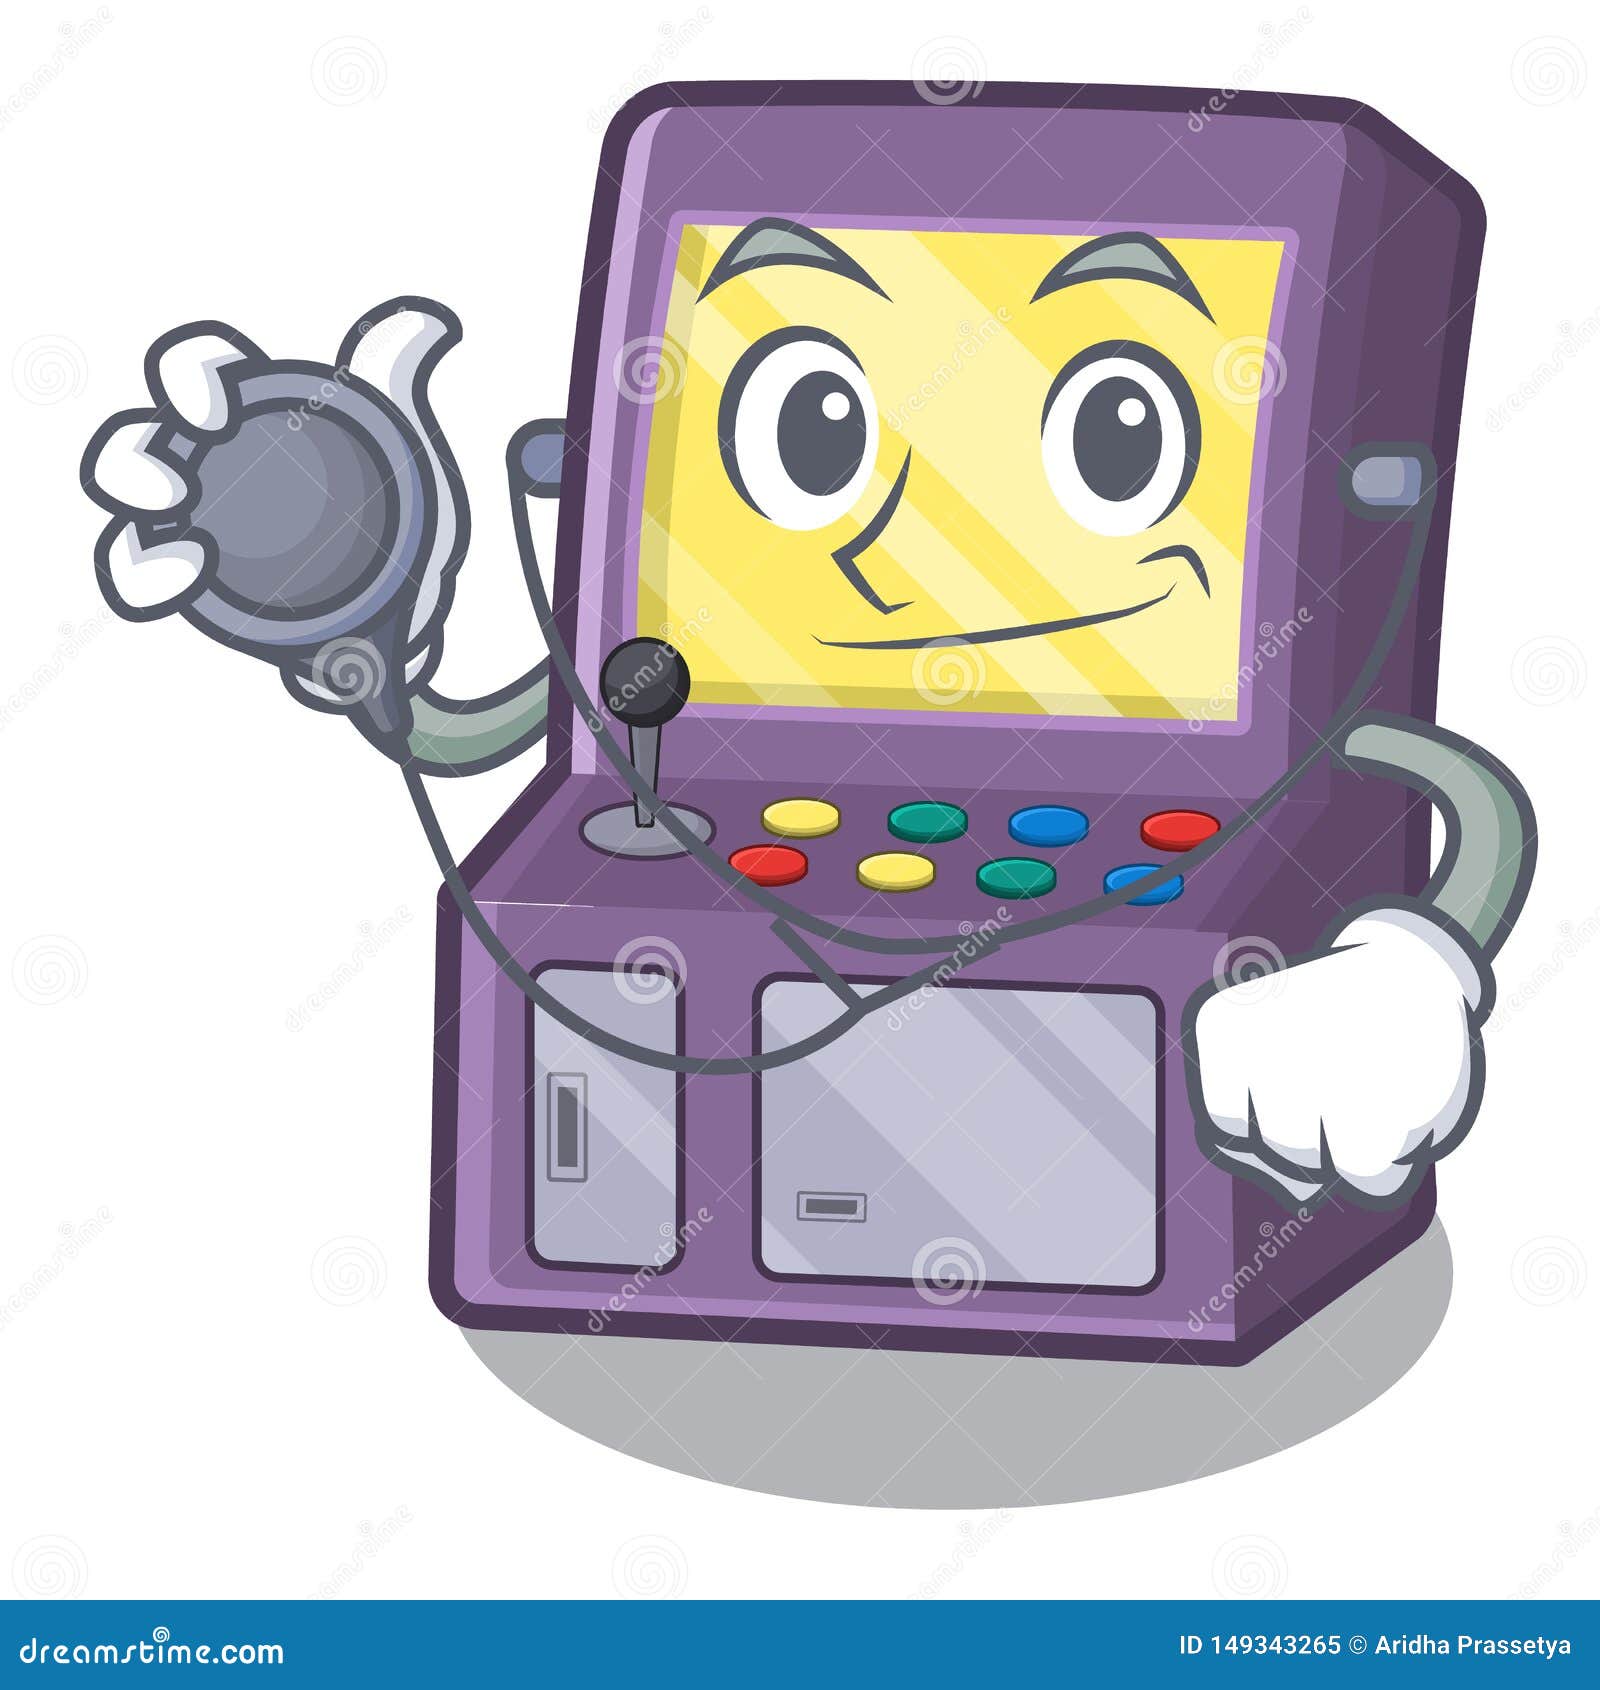 Doctor Arcade Machine Isolated with the Character Stock Vector ...